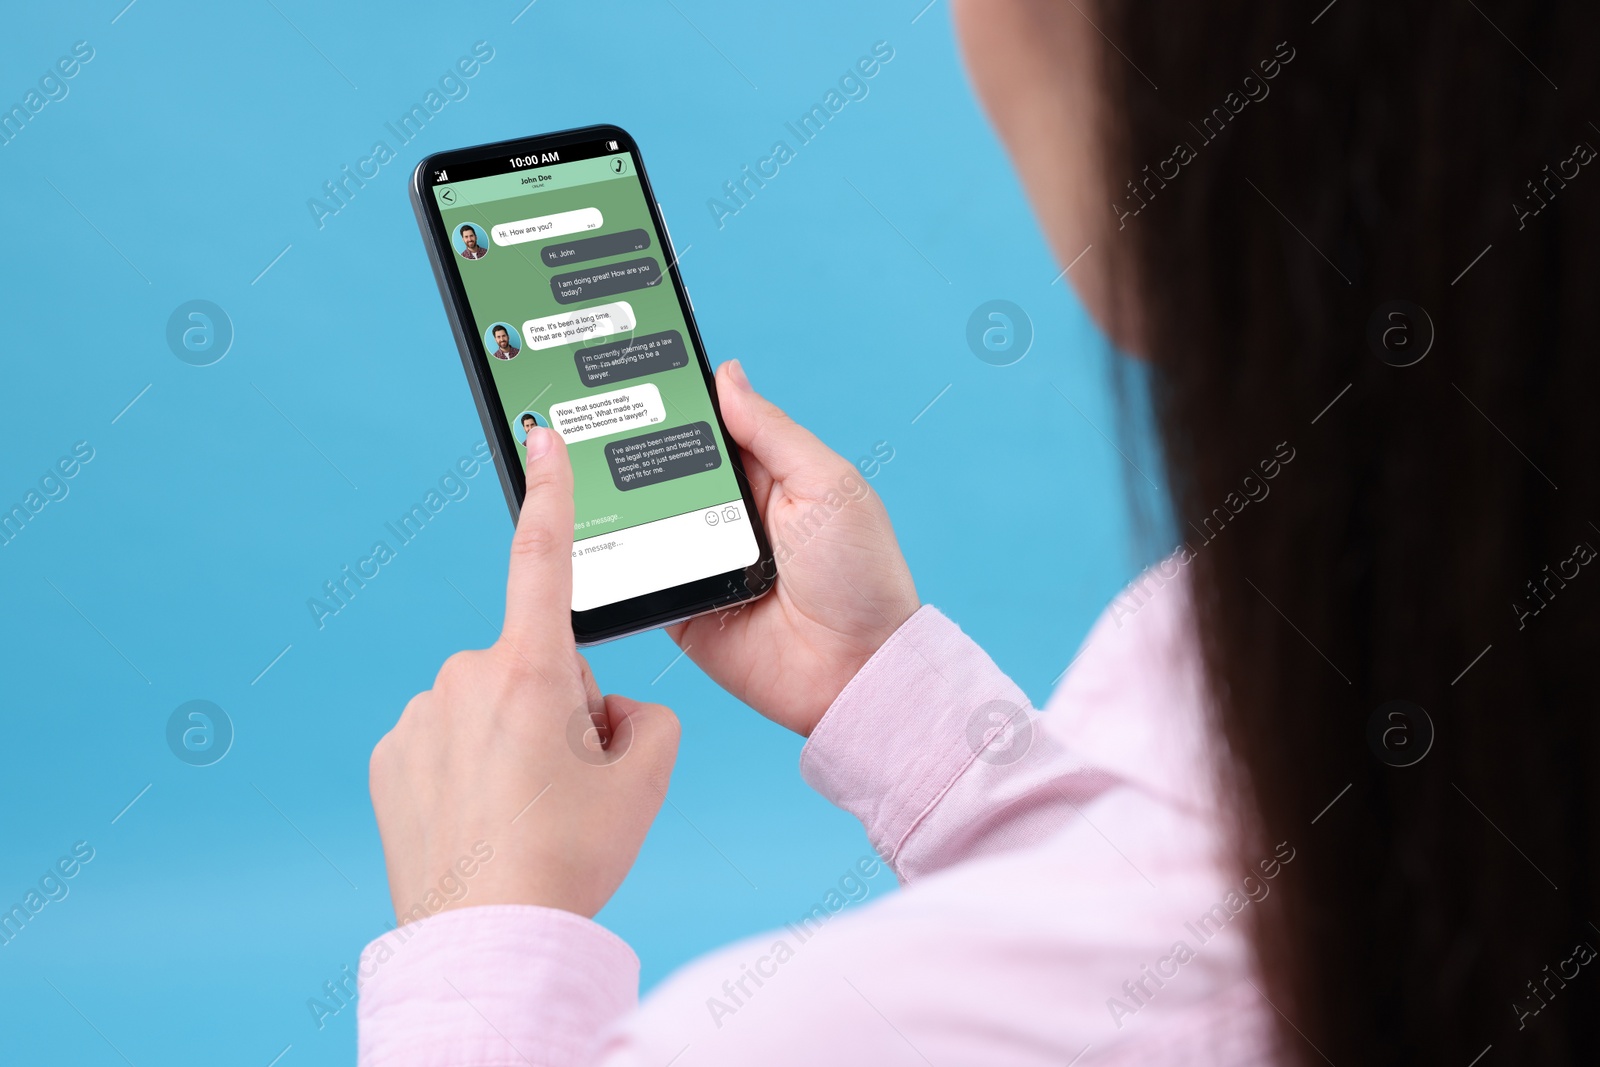 Image of Woman texting with friend using messaging application on smartphone against light blue background, closeup